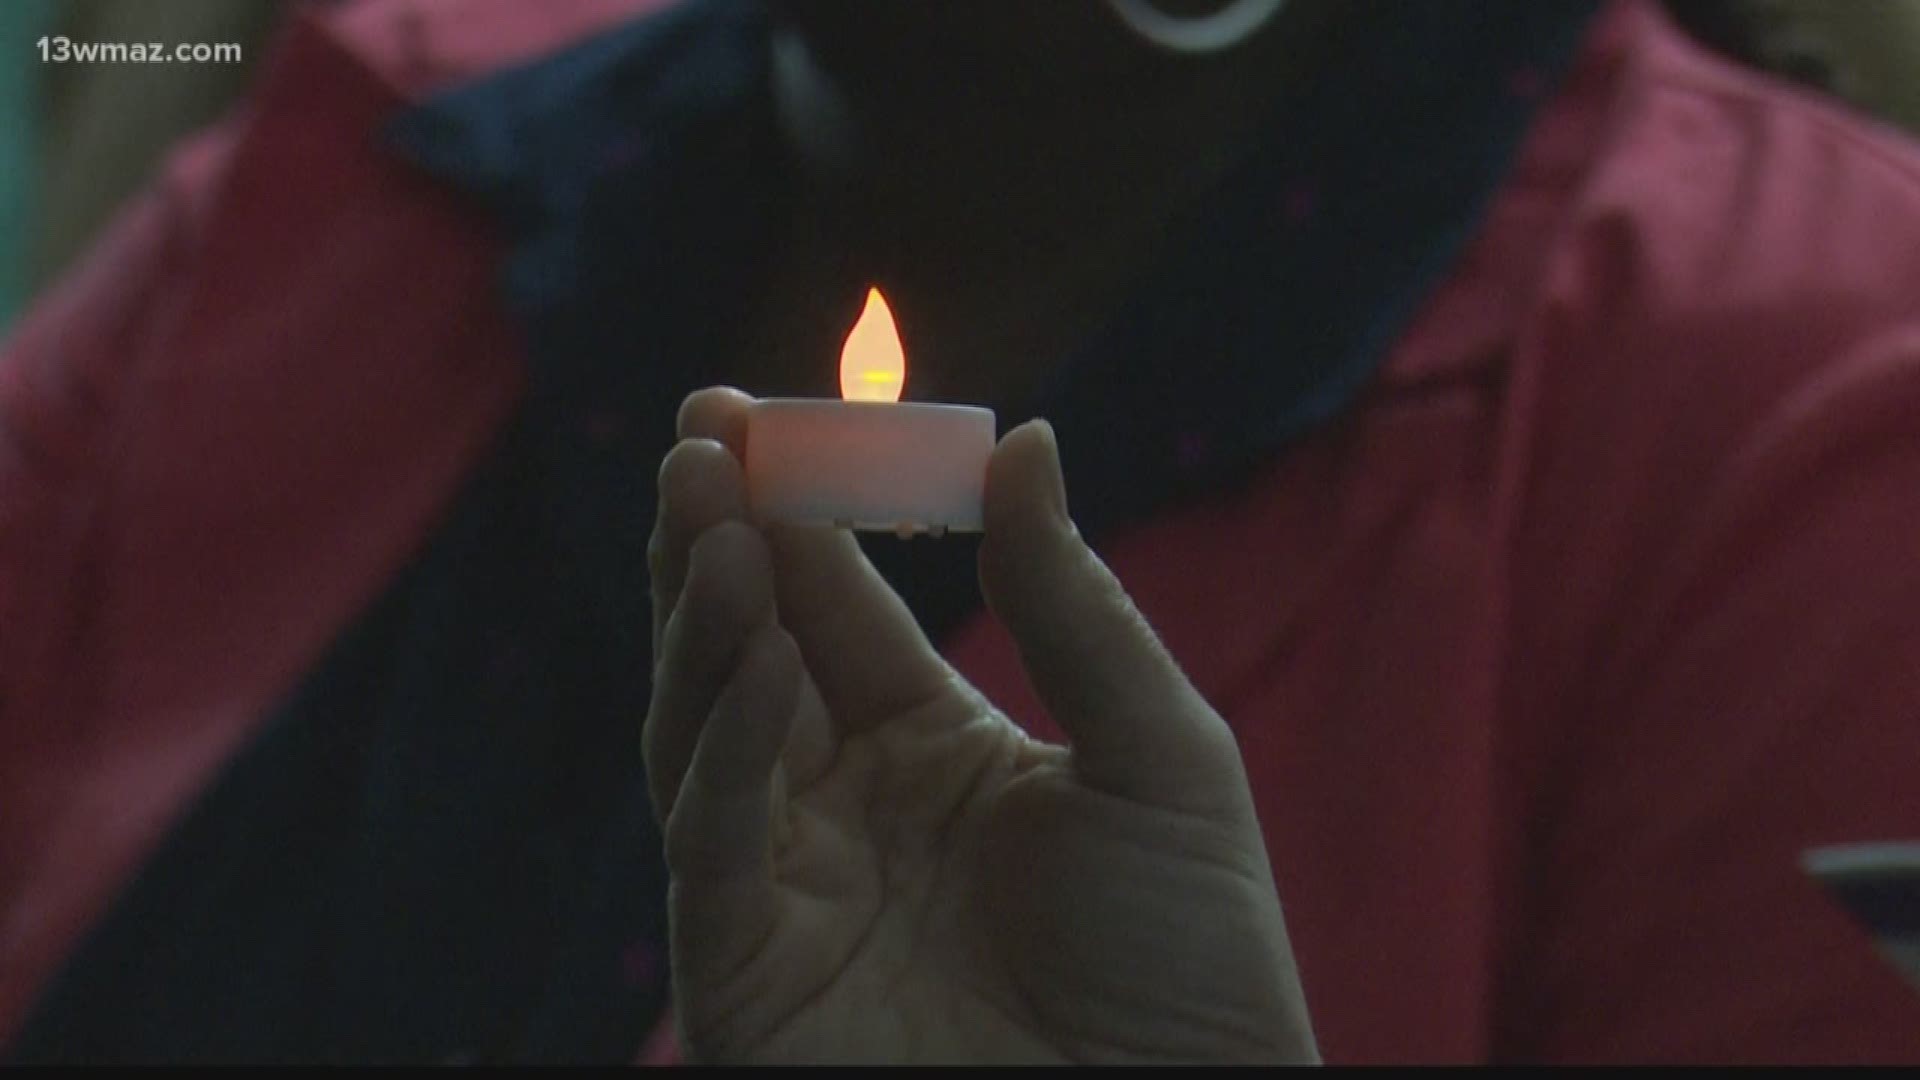 The Rescue Mission of Middle Georgia and Crisis Line Safe House came together Tuesday night for the vigil at the Government Center in downtown Macon.